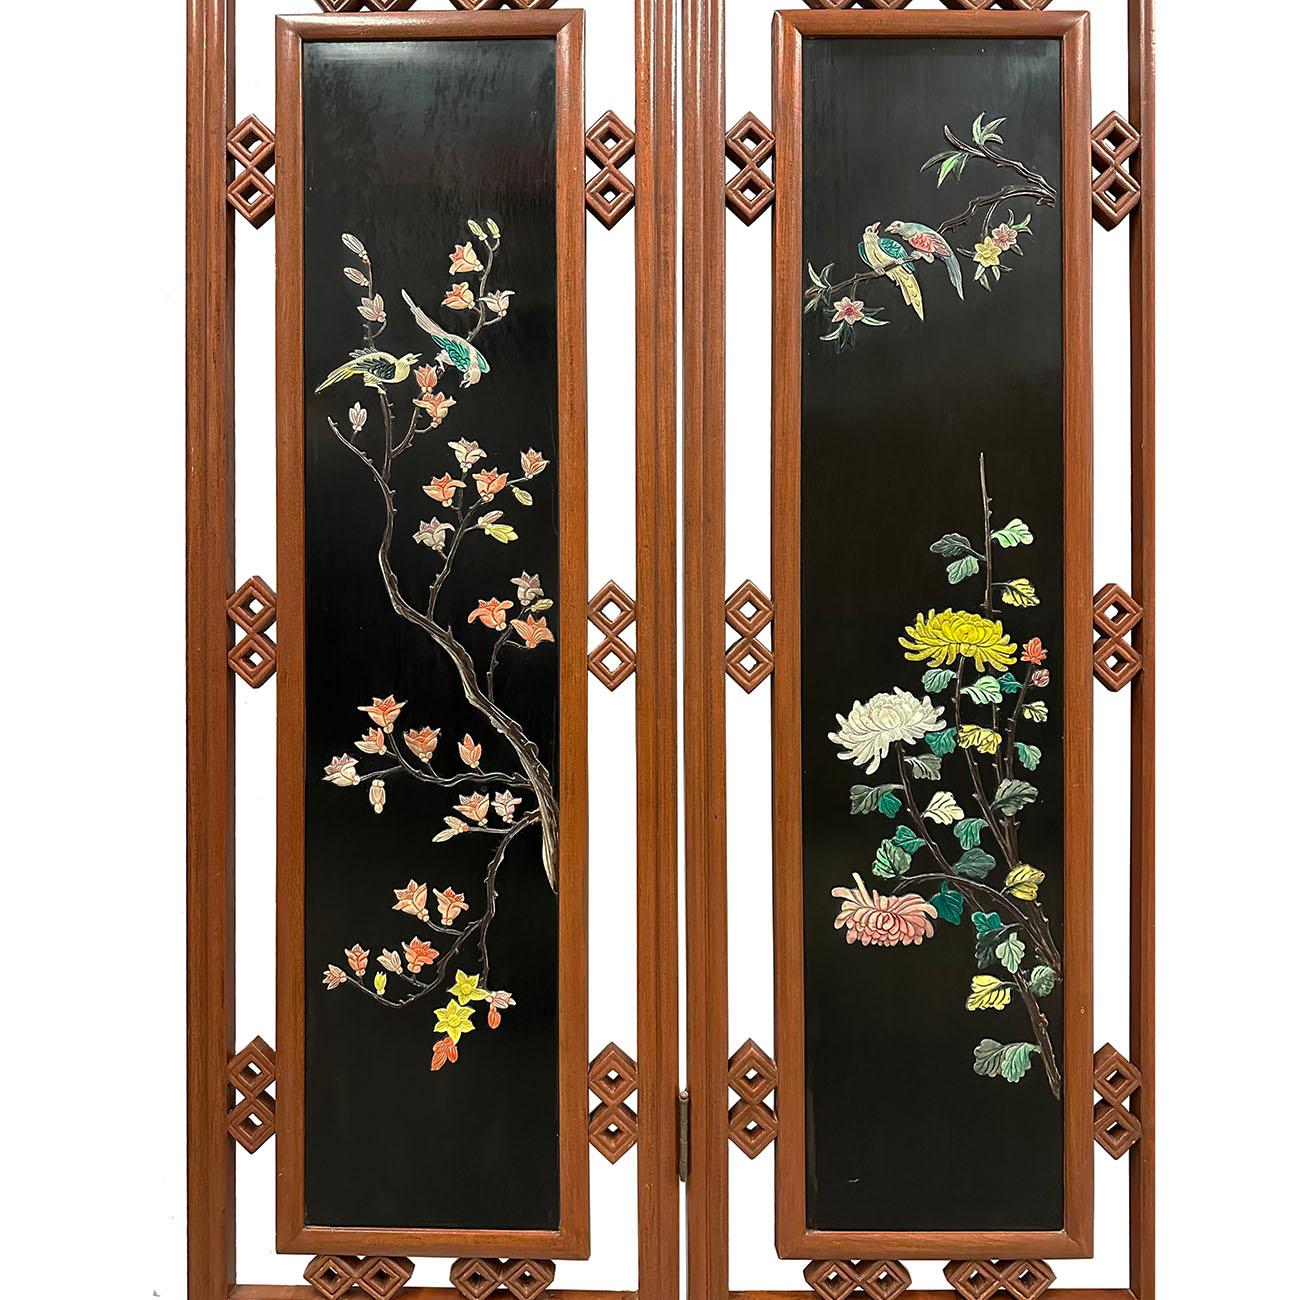 Chinese Export Mid-20th Century Chinese Hardwood Folding Screen/Room Divider with Soapstone Inl For Sale